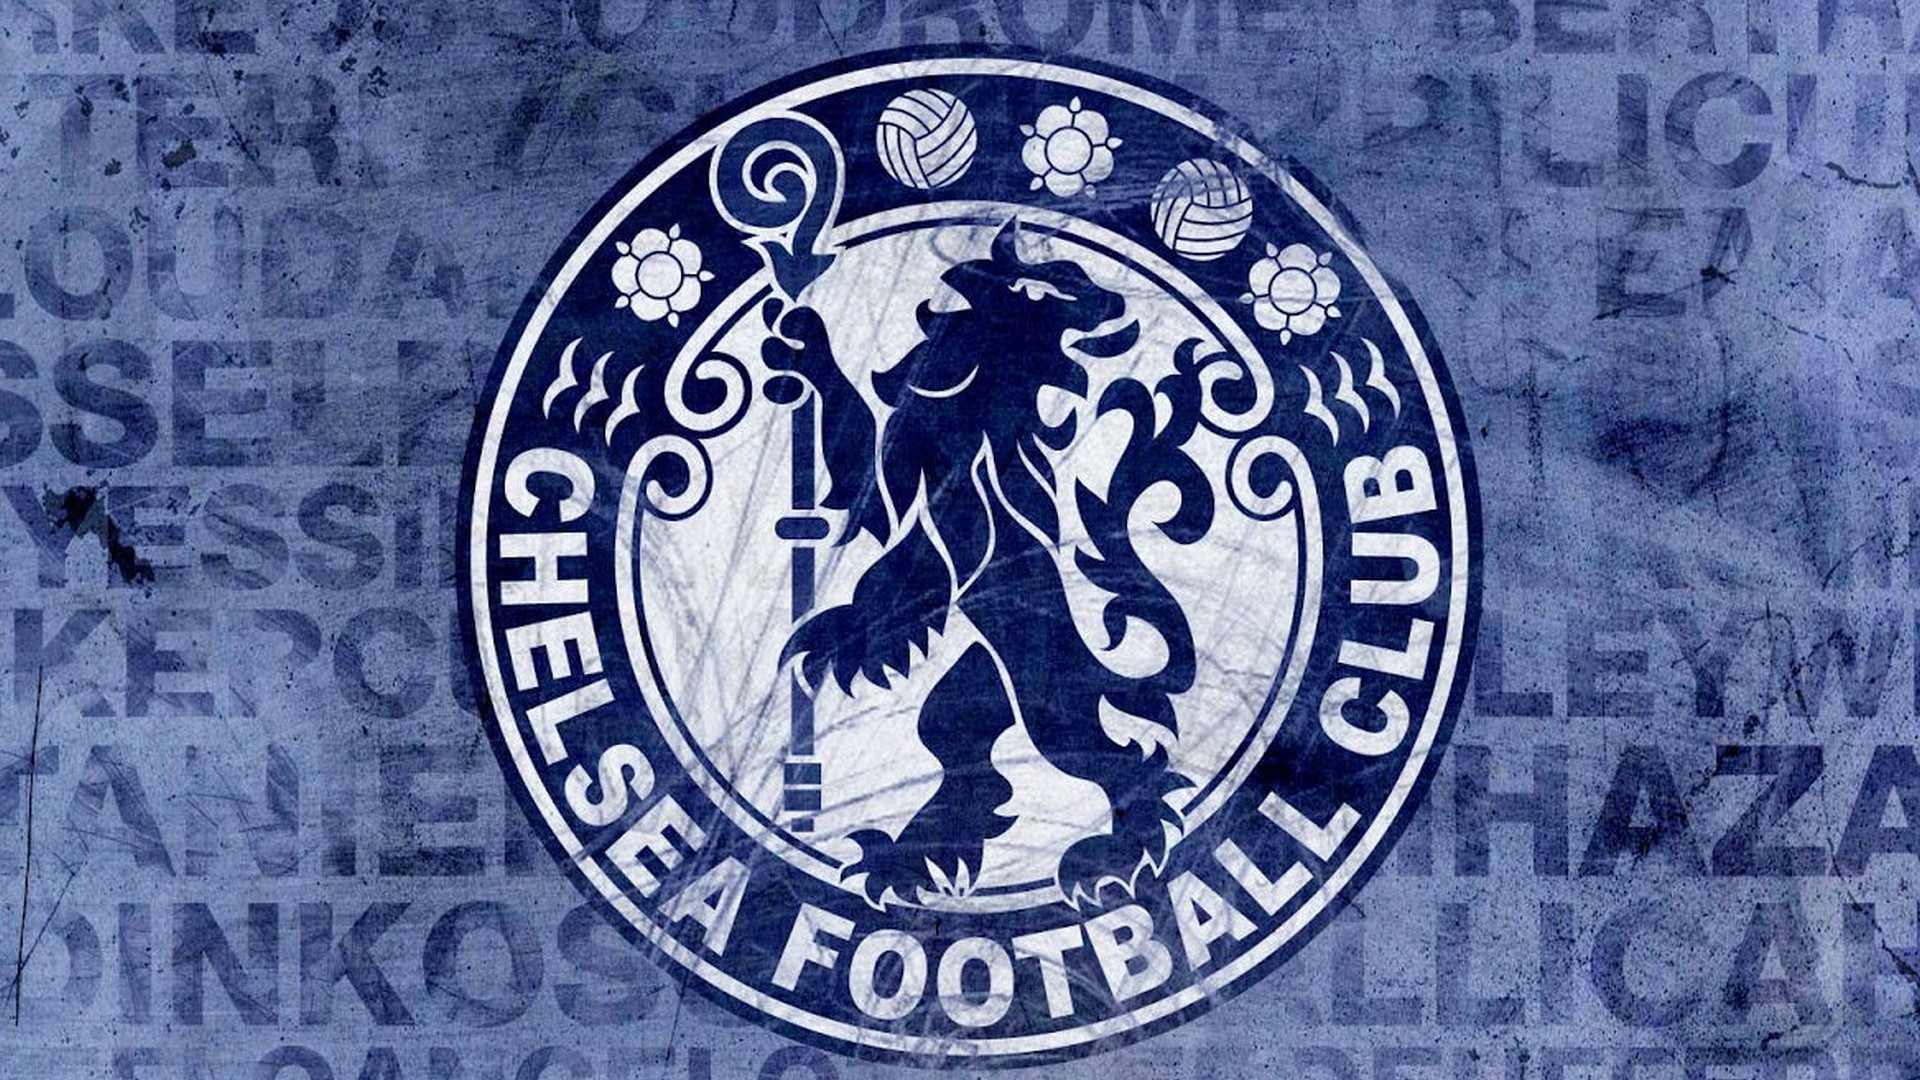 Wallpapers Chelsea FC with high-resolution 1920x1080 pixel. You can use this wallpaper for your Desktop Computers, Mac Screensavers, Windows Backgrounds, iPhone Wallpapers, Tablet or Android Lock screen and another Mobile device